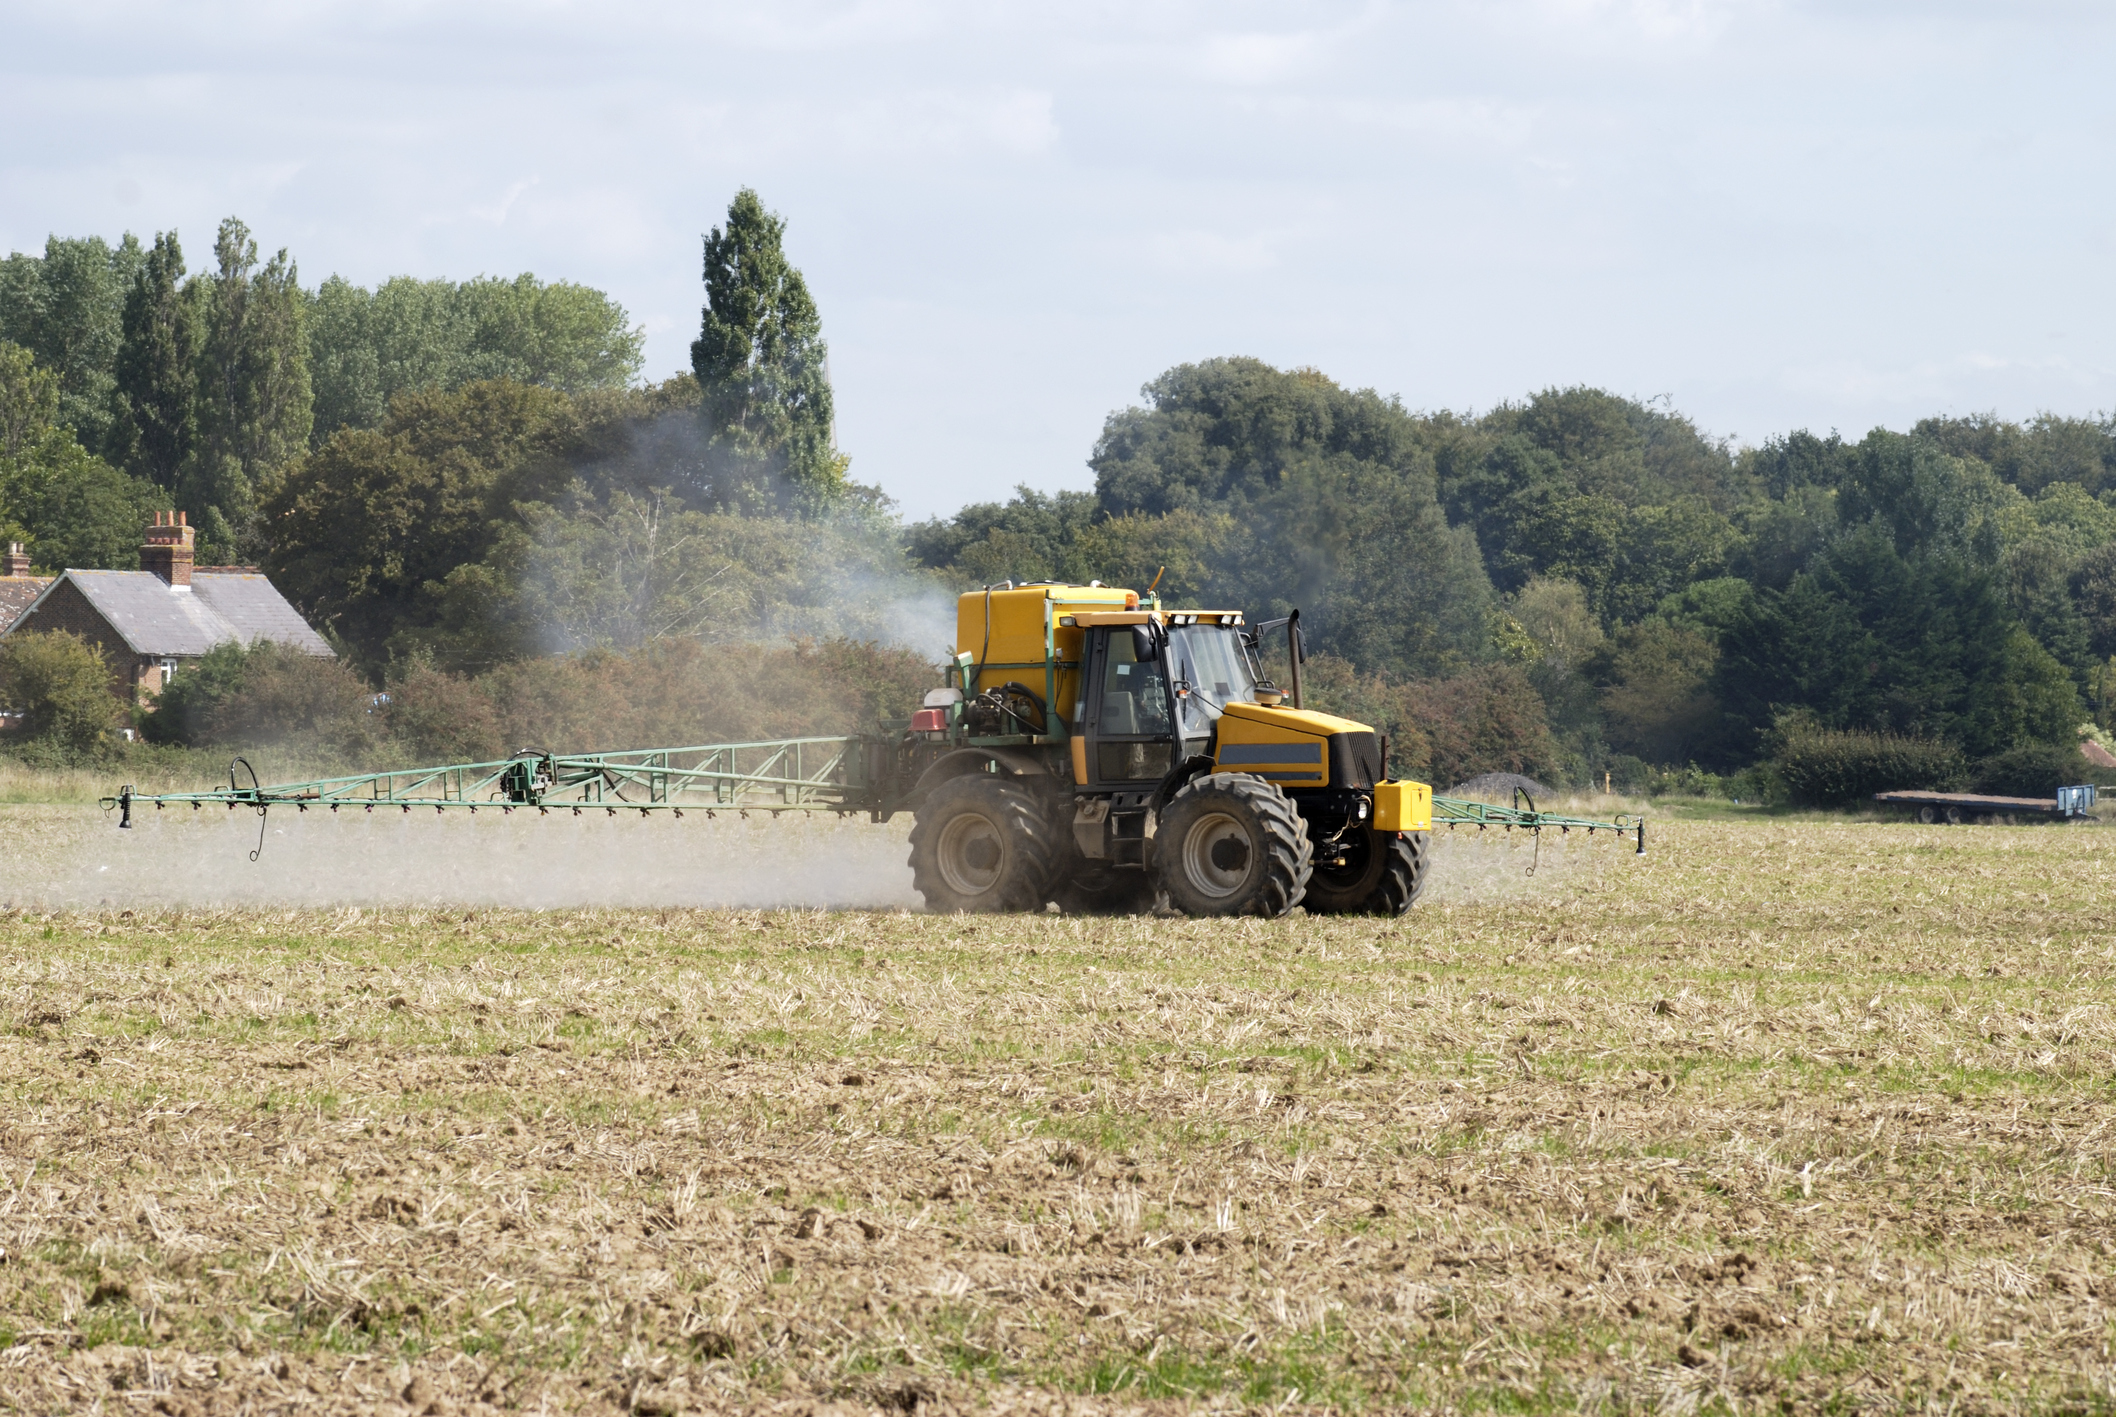 The decision is a disappointing blow to many arable farmers